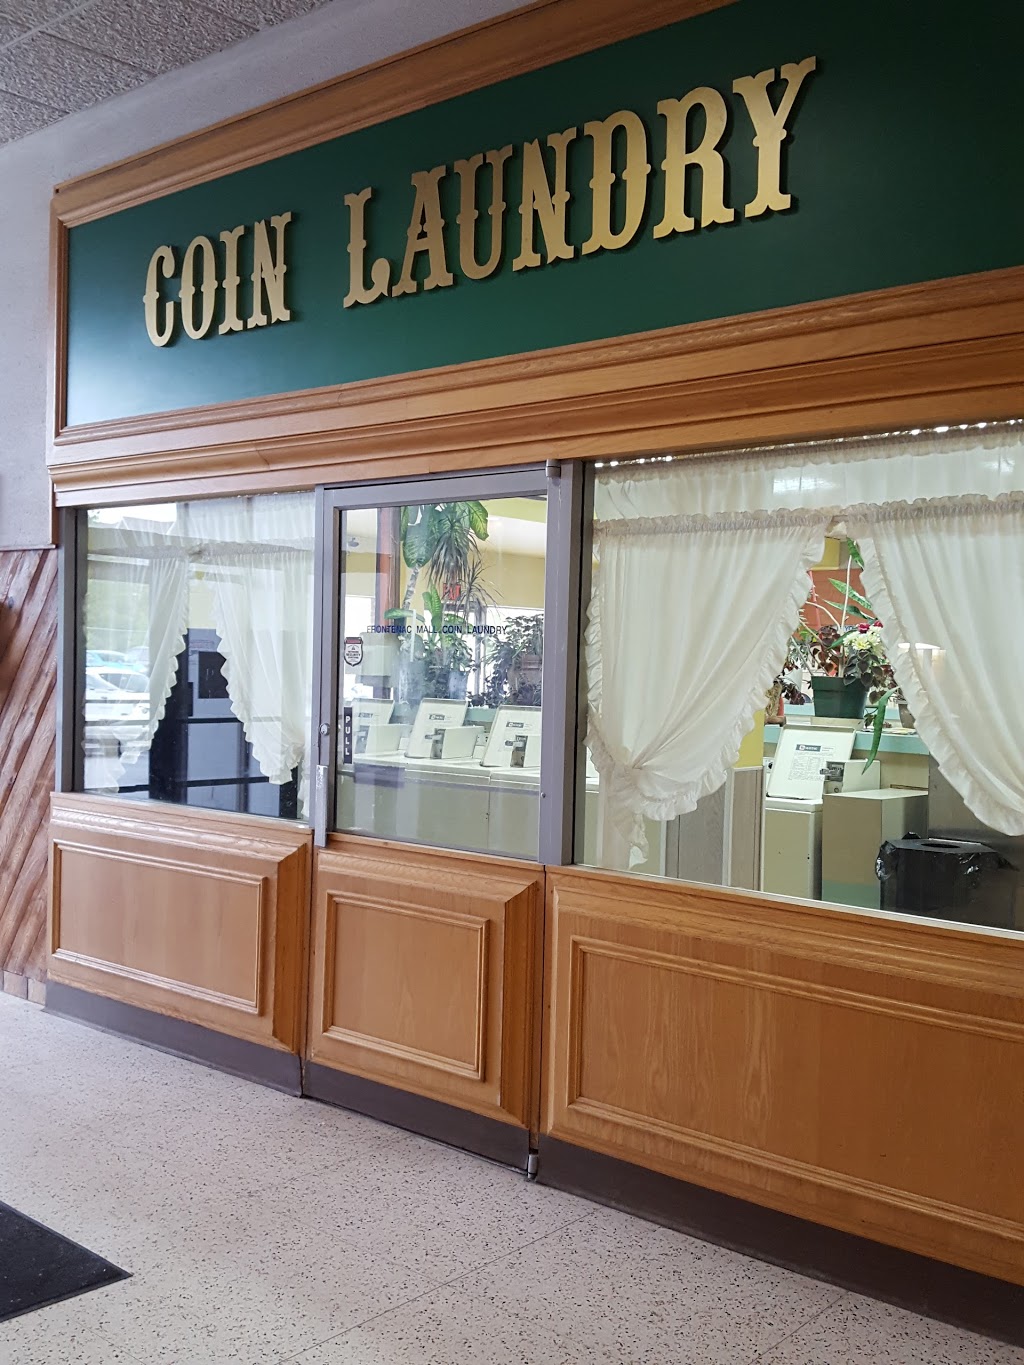 Frontenac Mall Coin Laundry | laundry | 1300 Bath Rd, Kingston, ON K7M 4X4, Canada | 6137672855 OR +1 613-767-2855